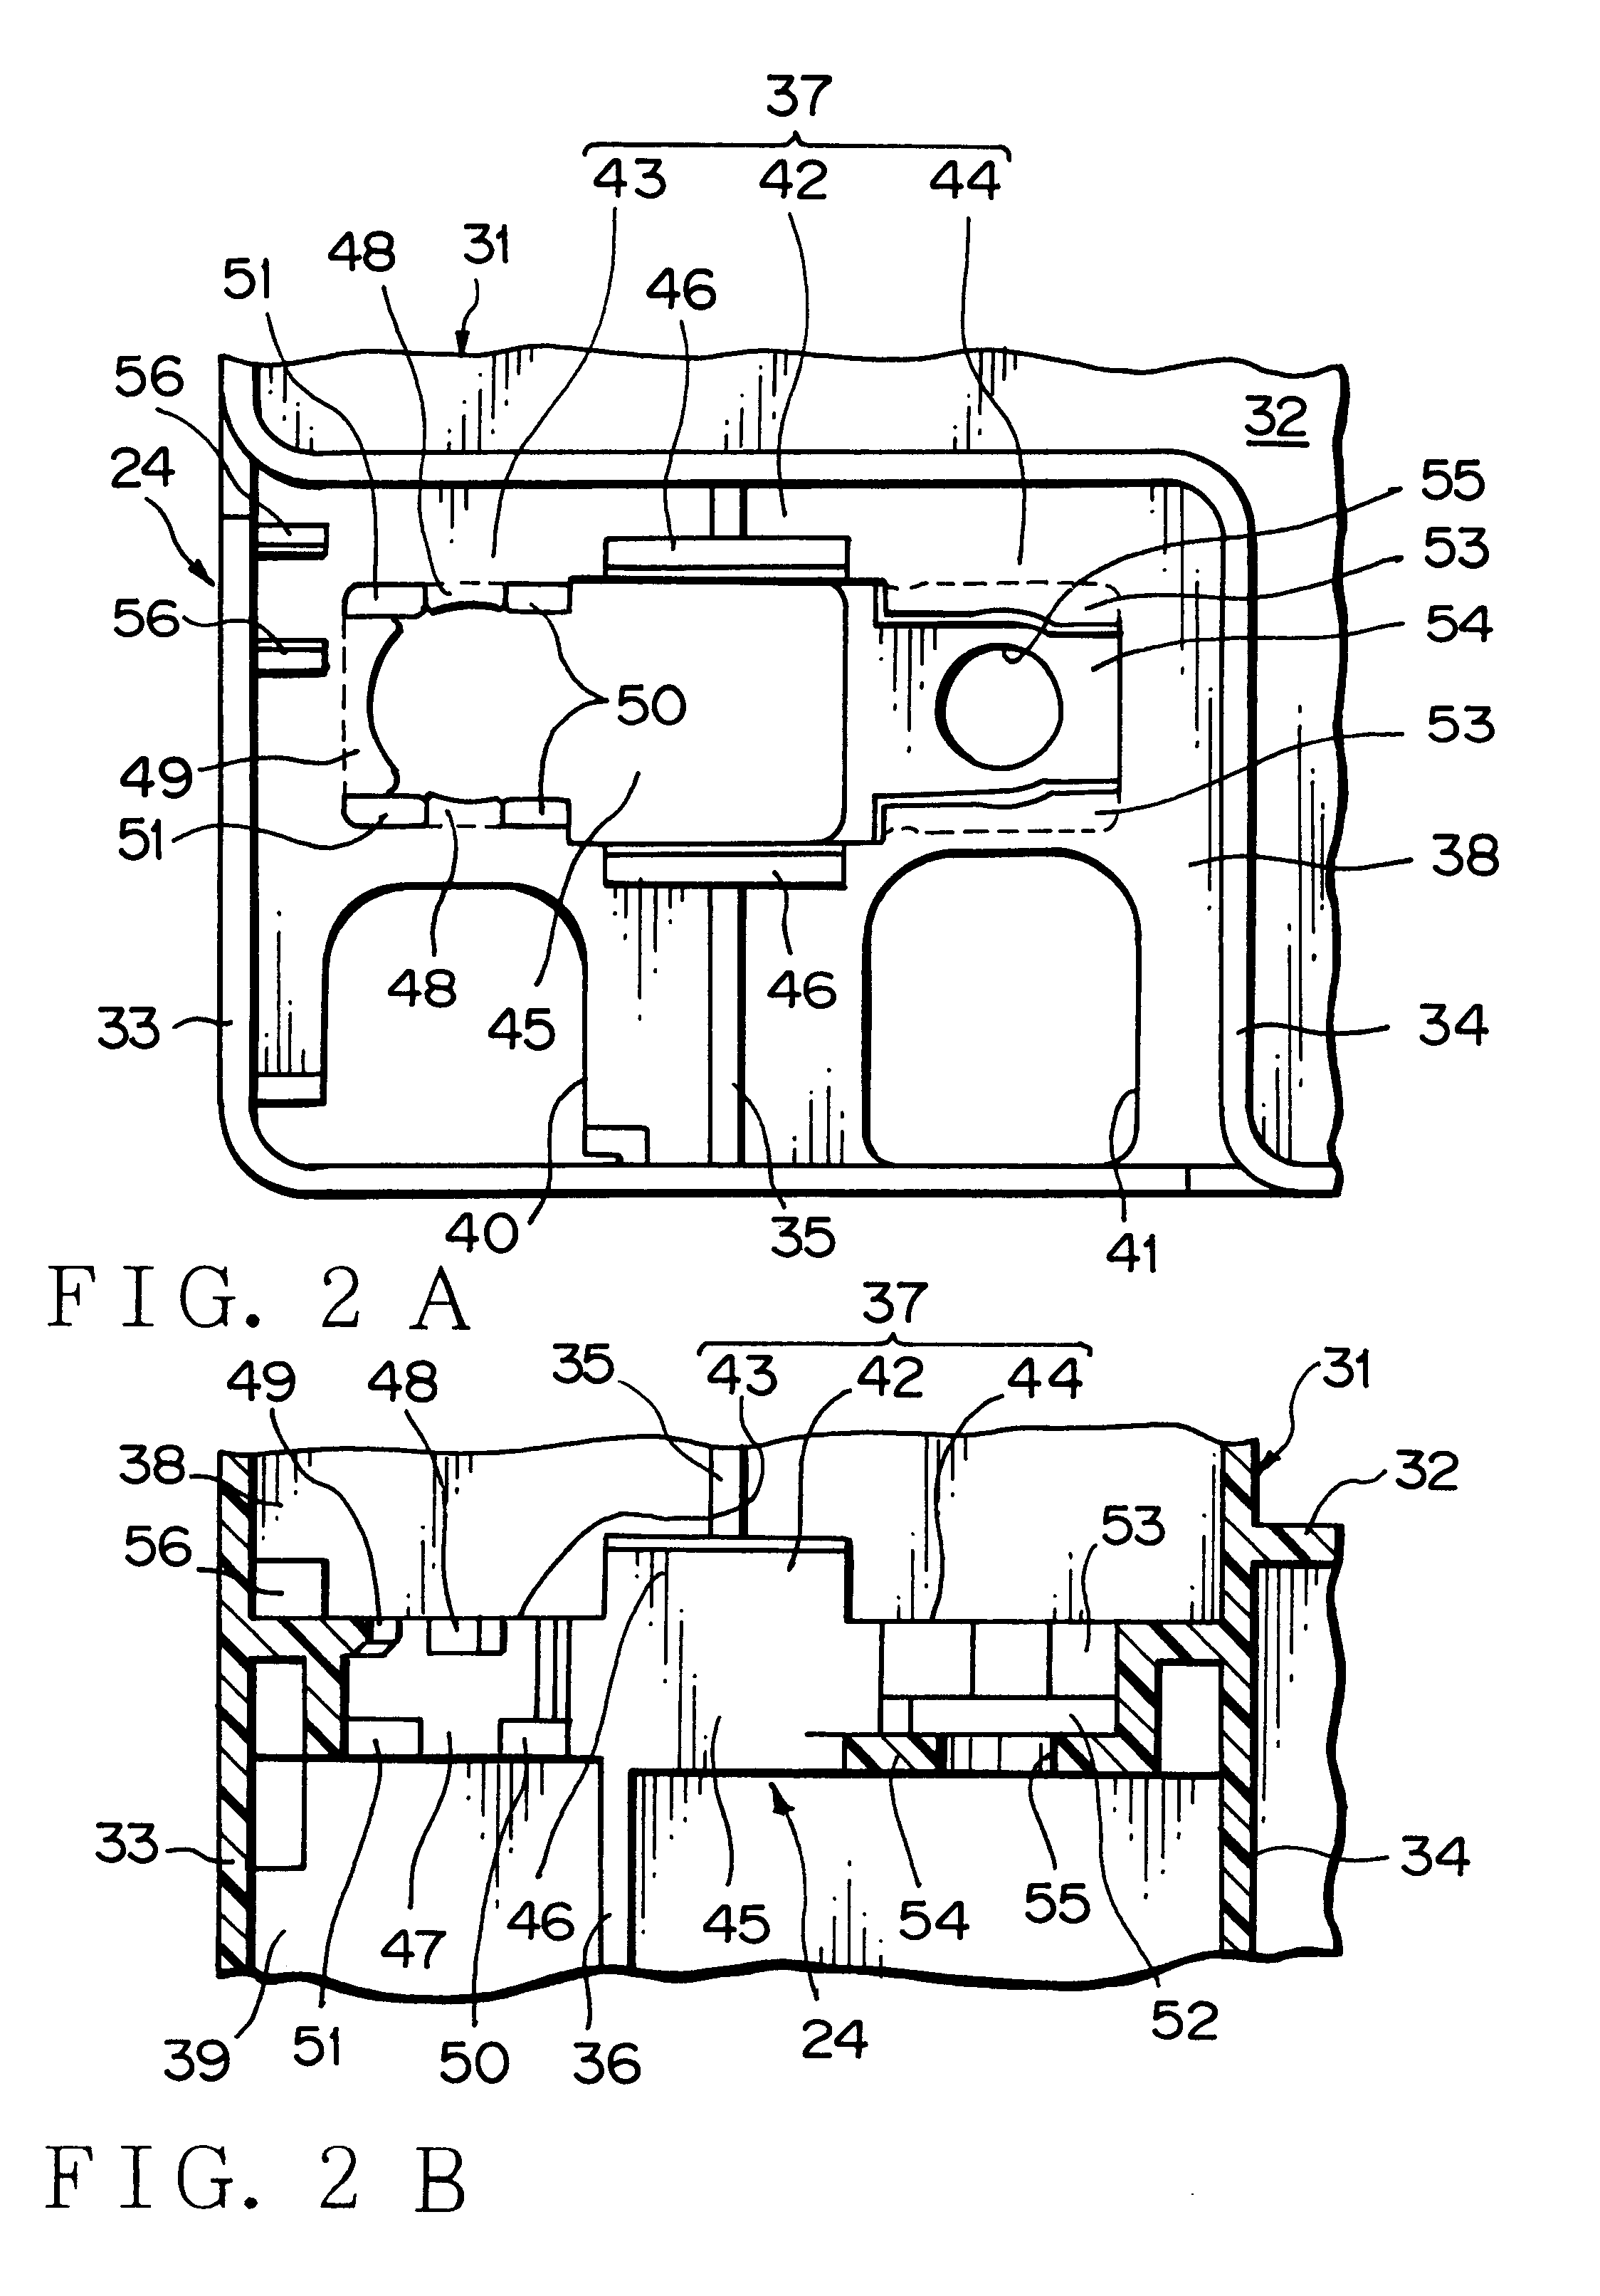 Connecting structure of a fuse link and external terminals